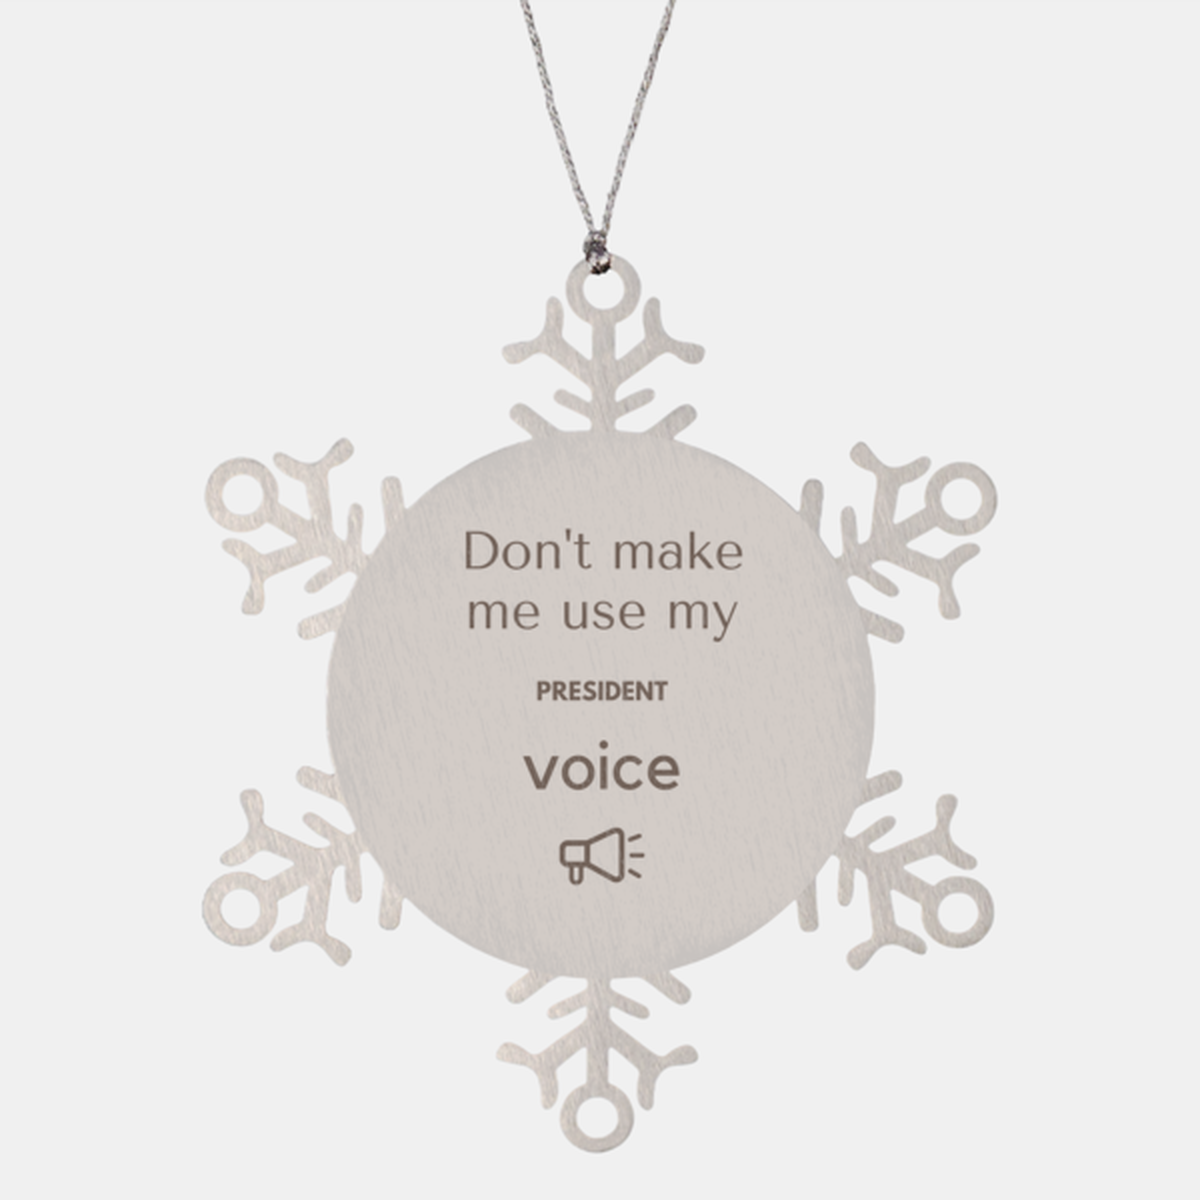 Don't make me use my President voice, Sarcasm President Ornament Gifts, Christmas President Snowflake Ornament Unique Gifts For President Coworkers, Men, Women, Colleague, Friends